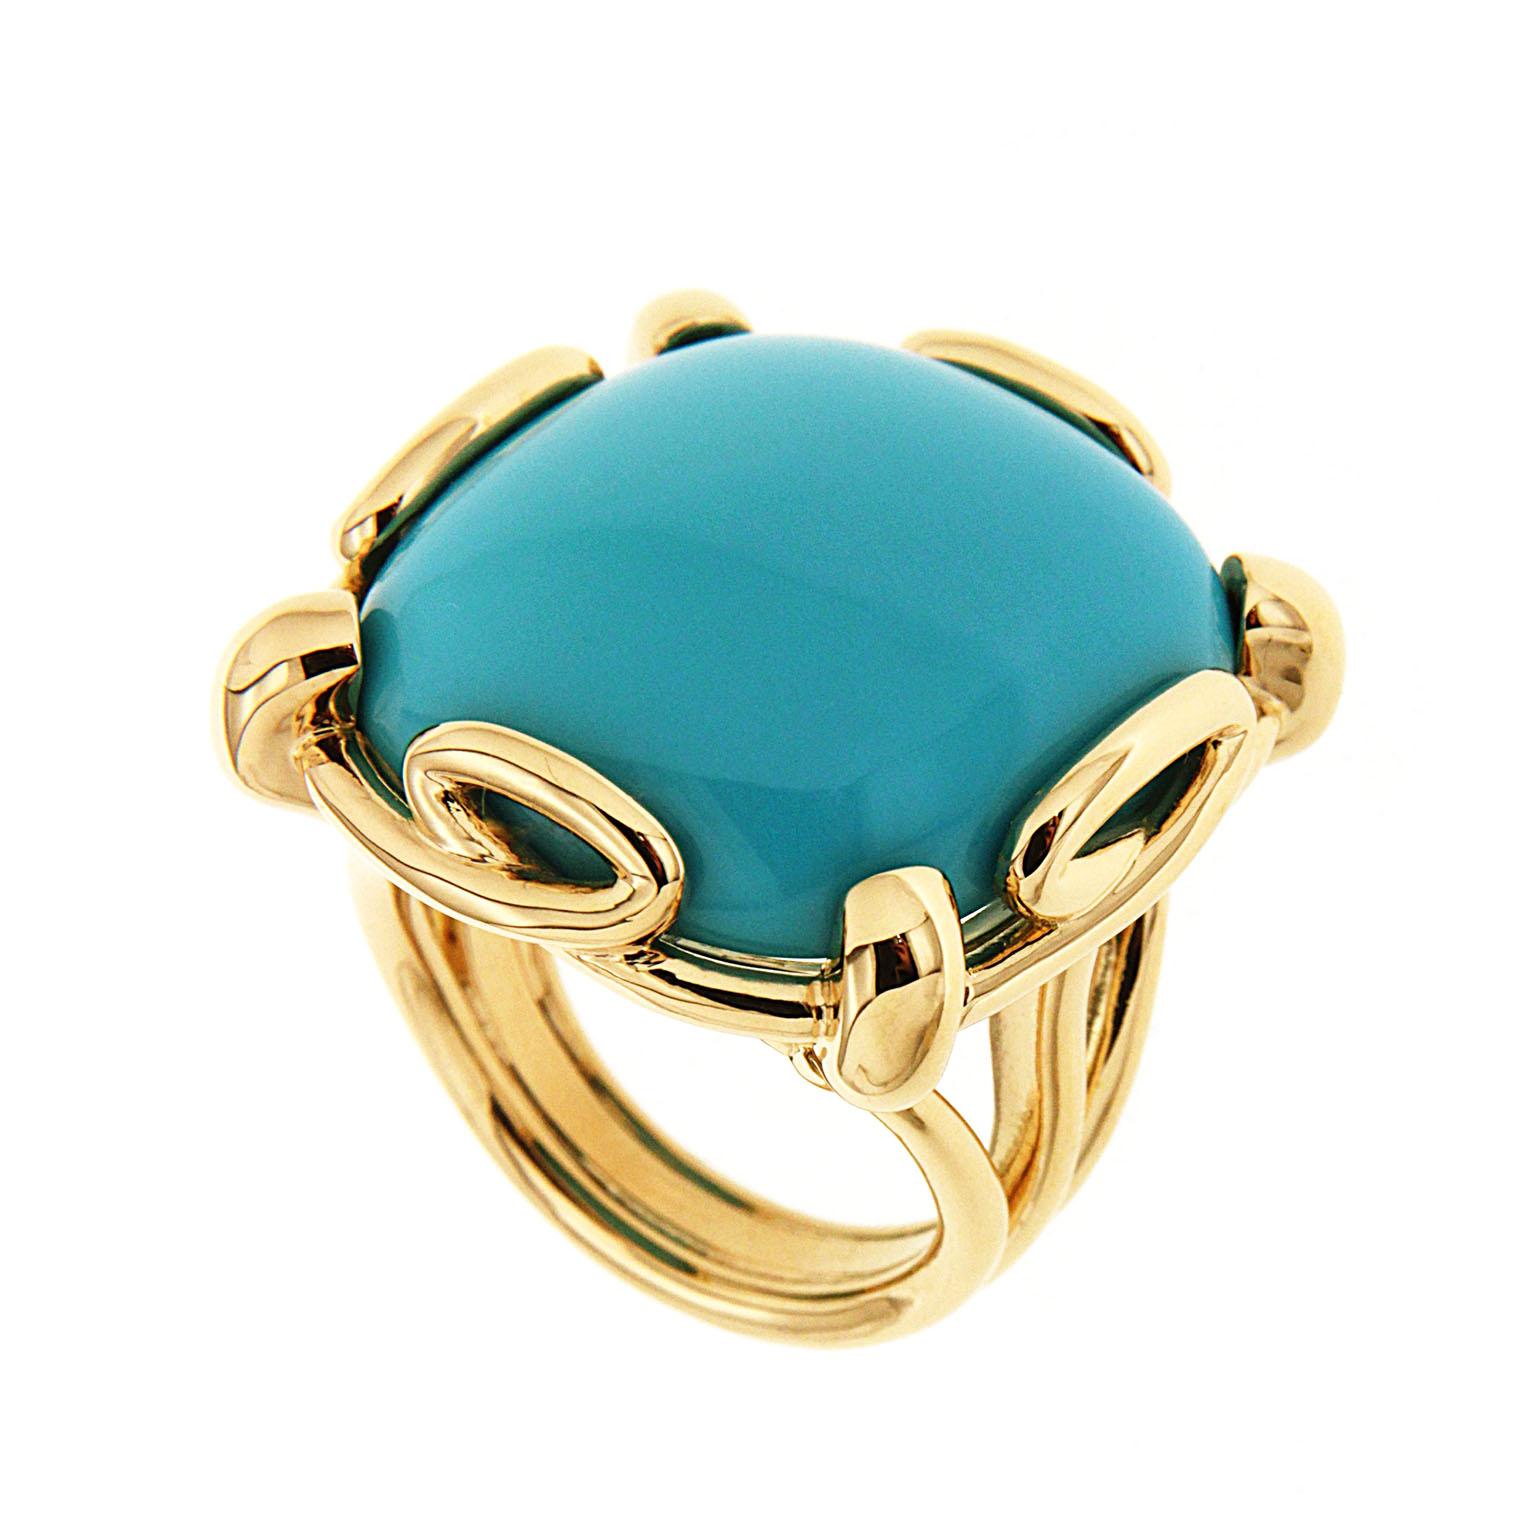 This unique ring features a cushion Turquoise cabochon center with loop design motifs. The ring is completed in 18kt yellow gold.